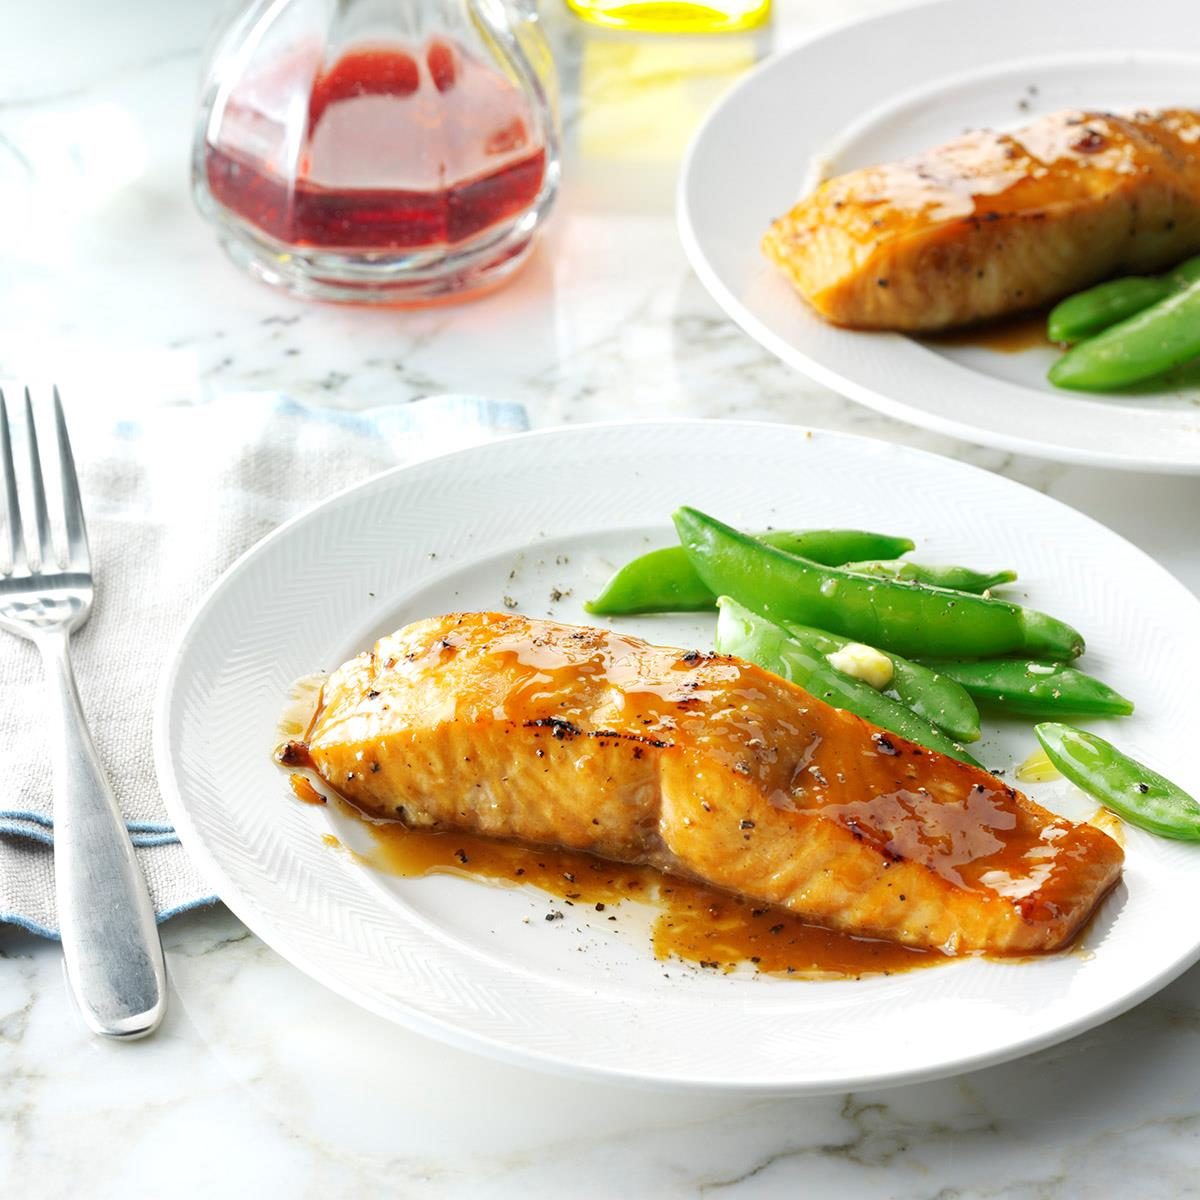 <p>Pop these protein-packed salmon fillets in the oven before whipping up a sweet basting sauce. This tangy entree cooks up in minutes making it a perfect meal for busy families and unexpected weekend guests. —Debra Martin, Belleville, Michigan</p> <div class="listicle-page__buttons"> <div class="listicle-page__cta-button"><a href='https://www.tasteofhome.com/recipes/brown-sugar-glazed-salmon/'>Get Recipe</a></div> </div>